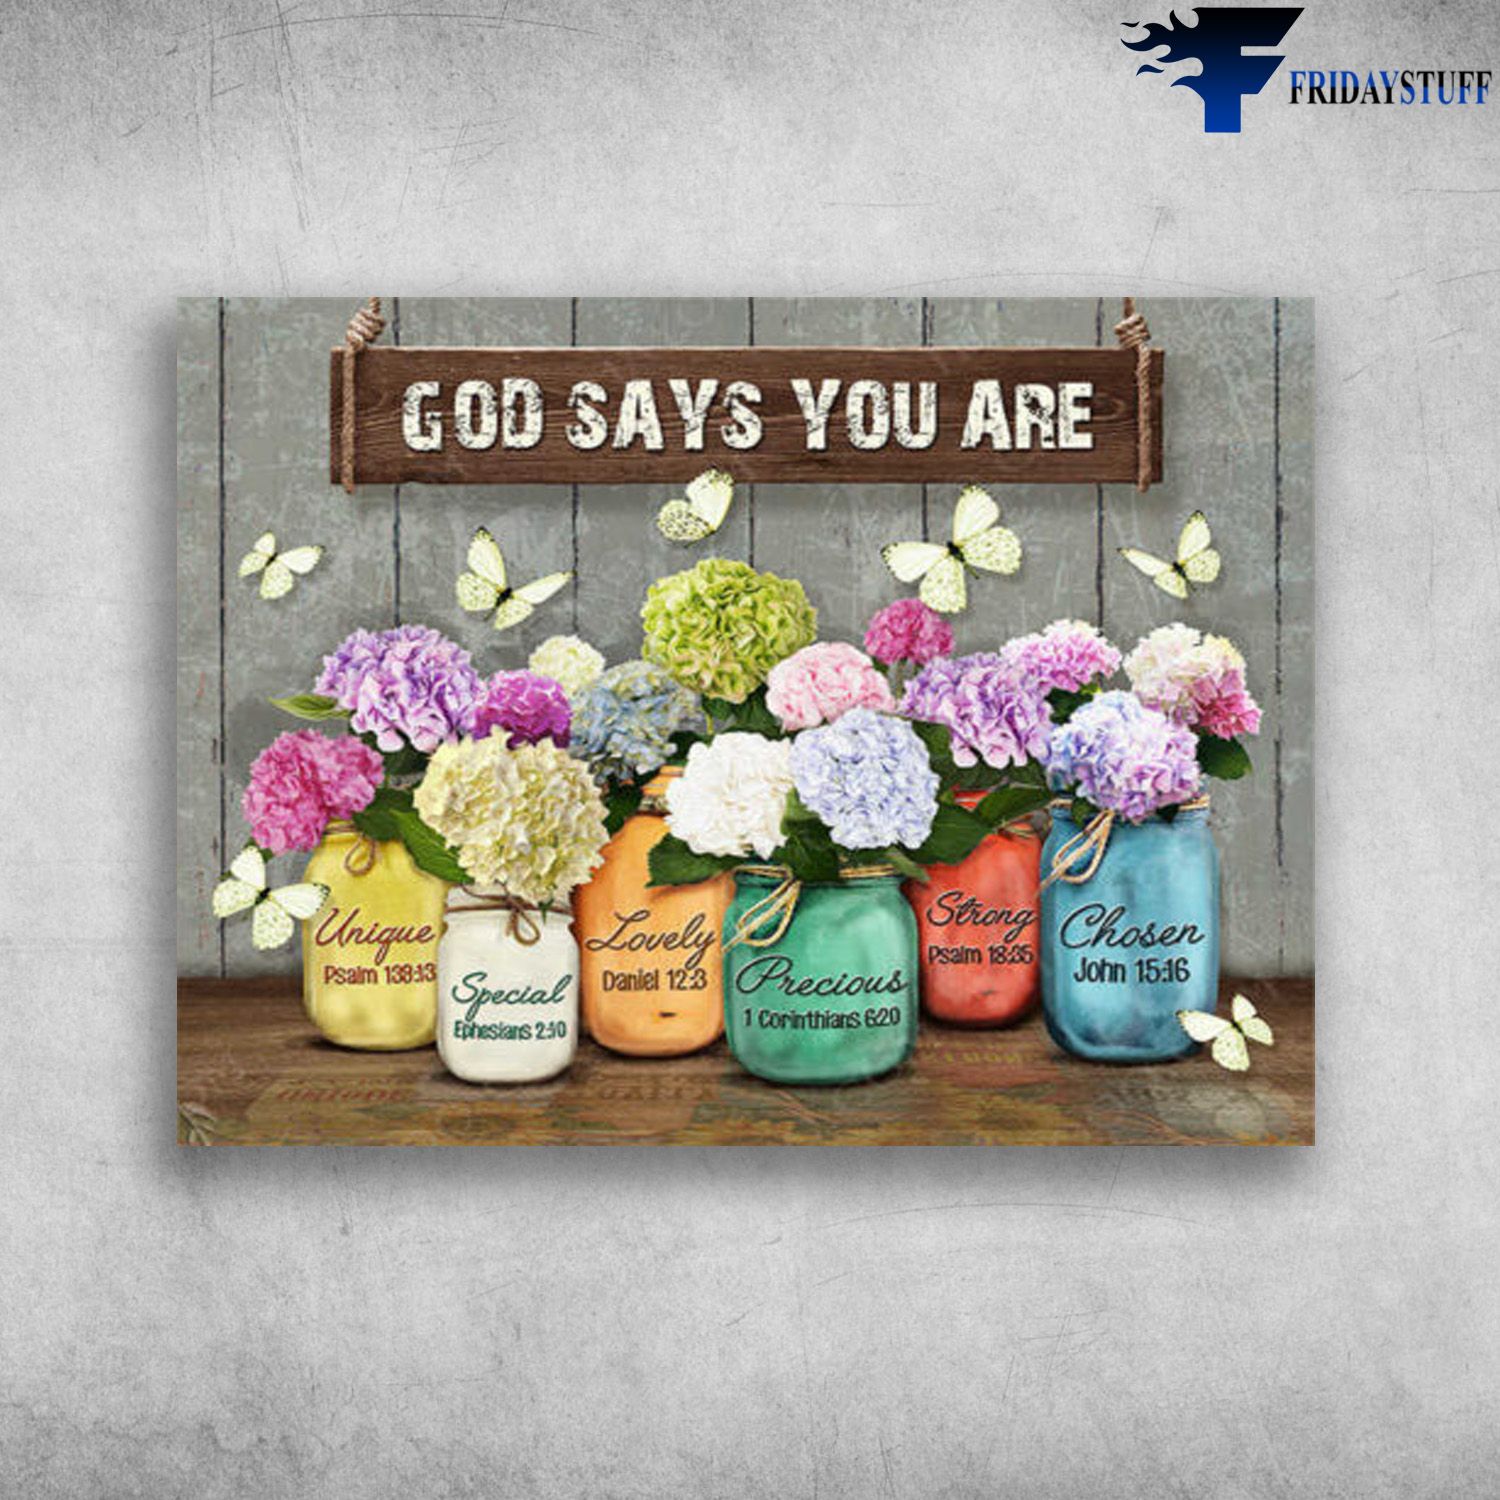 Butterfly Flower, Hydrangea Poster - God Says You Are, Unique, Special, Lovely, Precious, Strong, Chosen